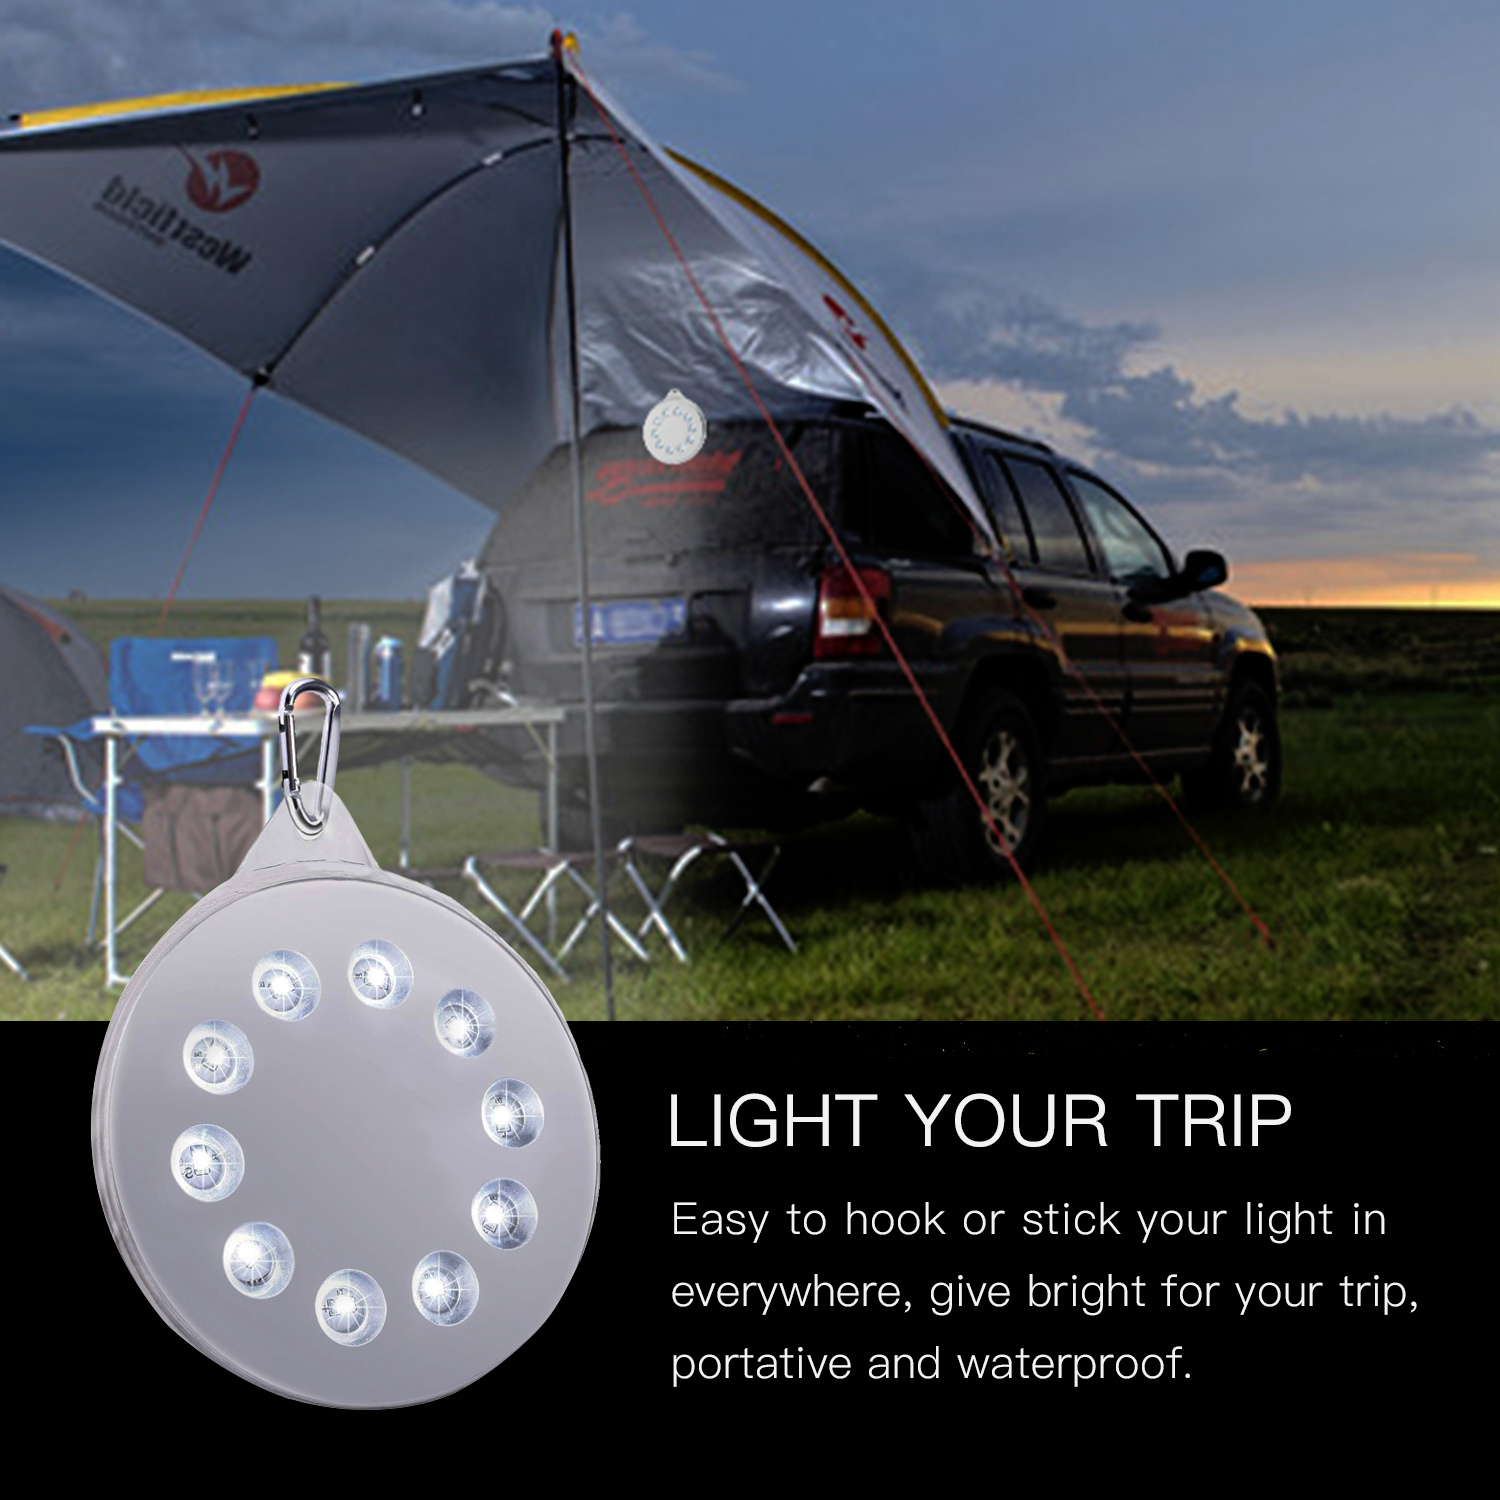 ZTARX-Solar-Camping-Light-Magnetic-Hanging-Lamp-Tent-Lantern-USB-Power-Bank-for-Outdoor-Hiking-Trave-1816212-5